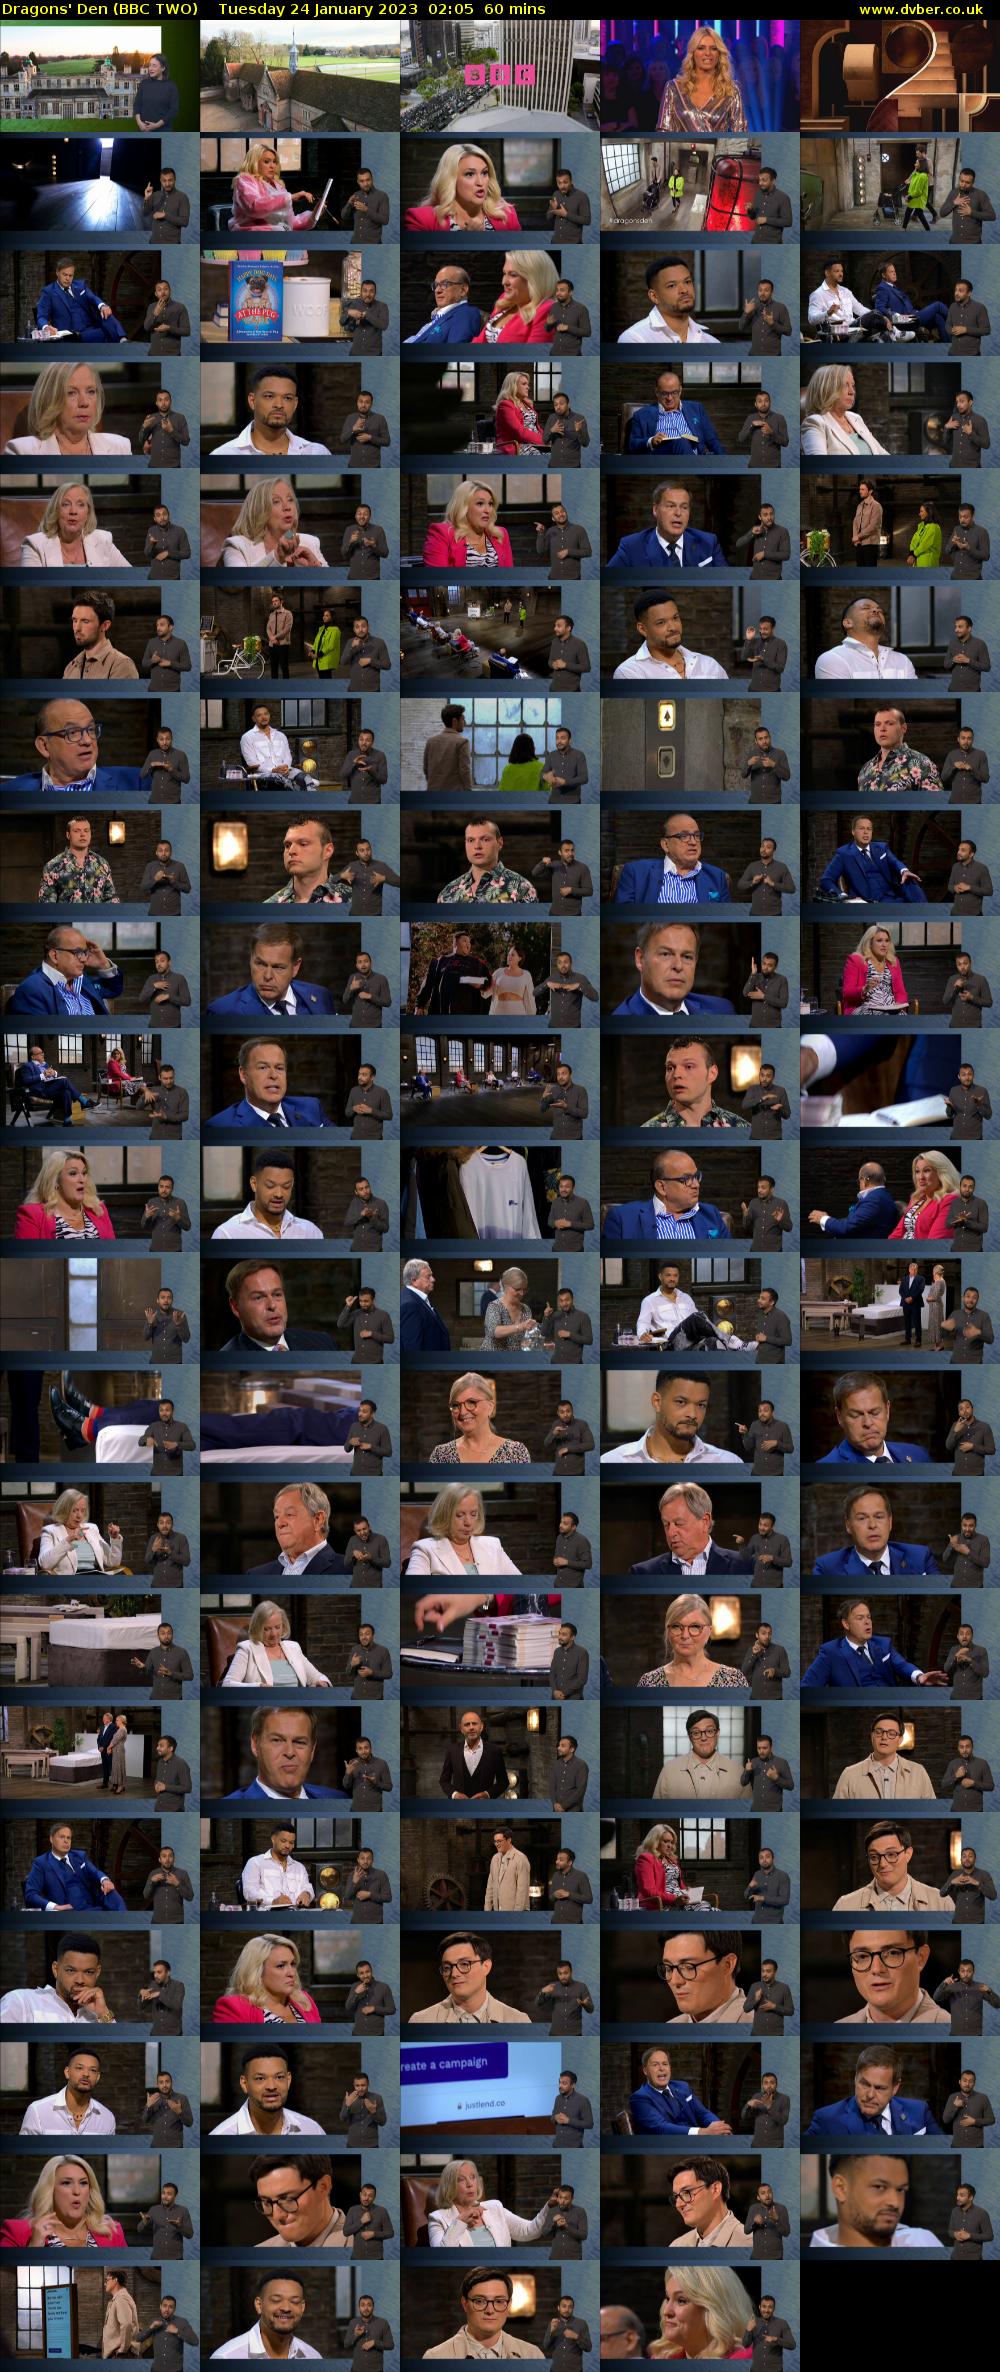 Dragons' Den (BBC TWO) Tuesday 24 January 2023 02:05 - 03:05